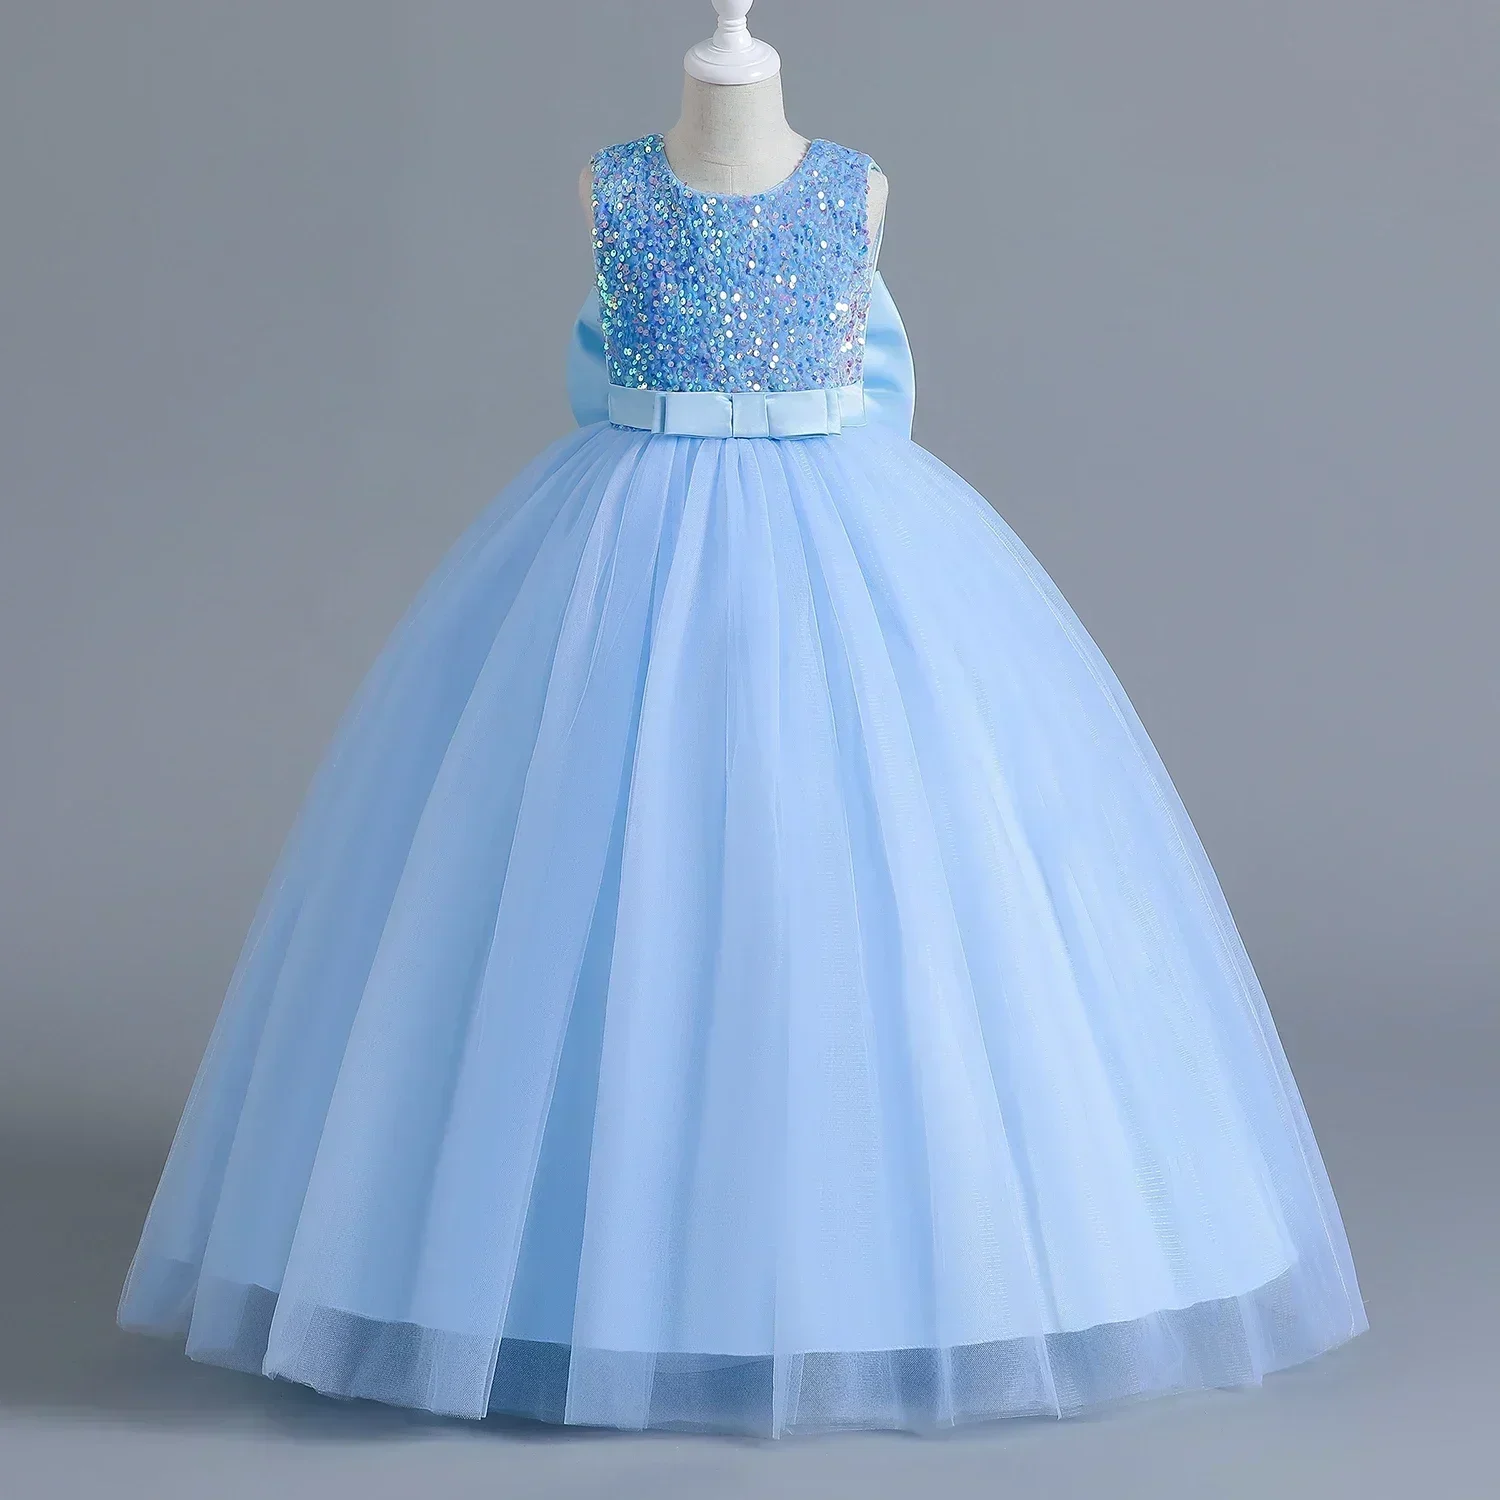 5-14 Yrs Girls Party Dresses Blue Sequined Backless Bow Gala Prom Gown Children Formal Events Costume Birthday Princess Dress